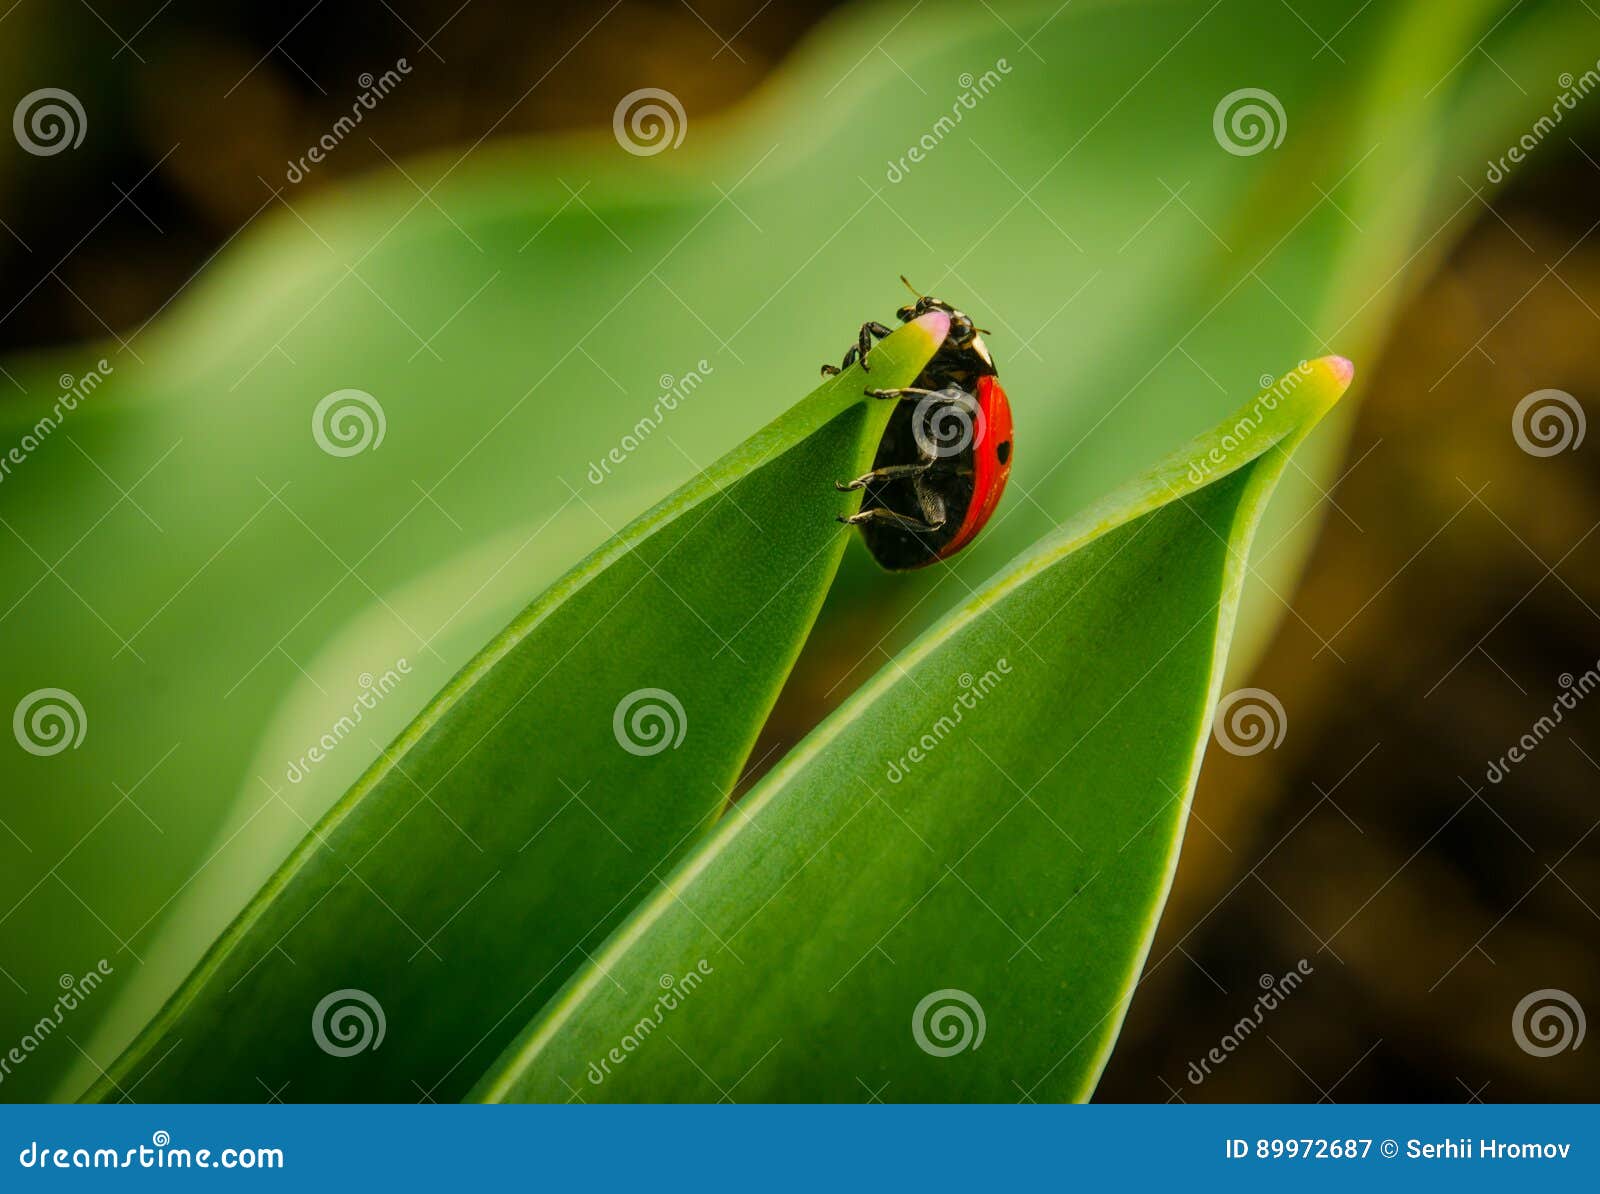 the side of wild red ladybug coccinellidae anatis ocellata coleoptera ladybird on a green grass